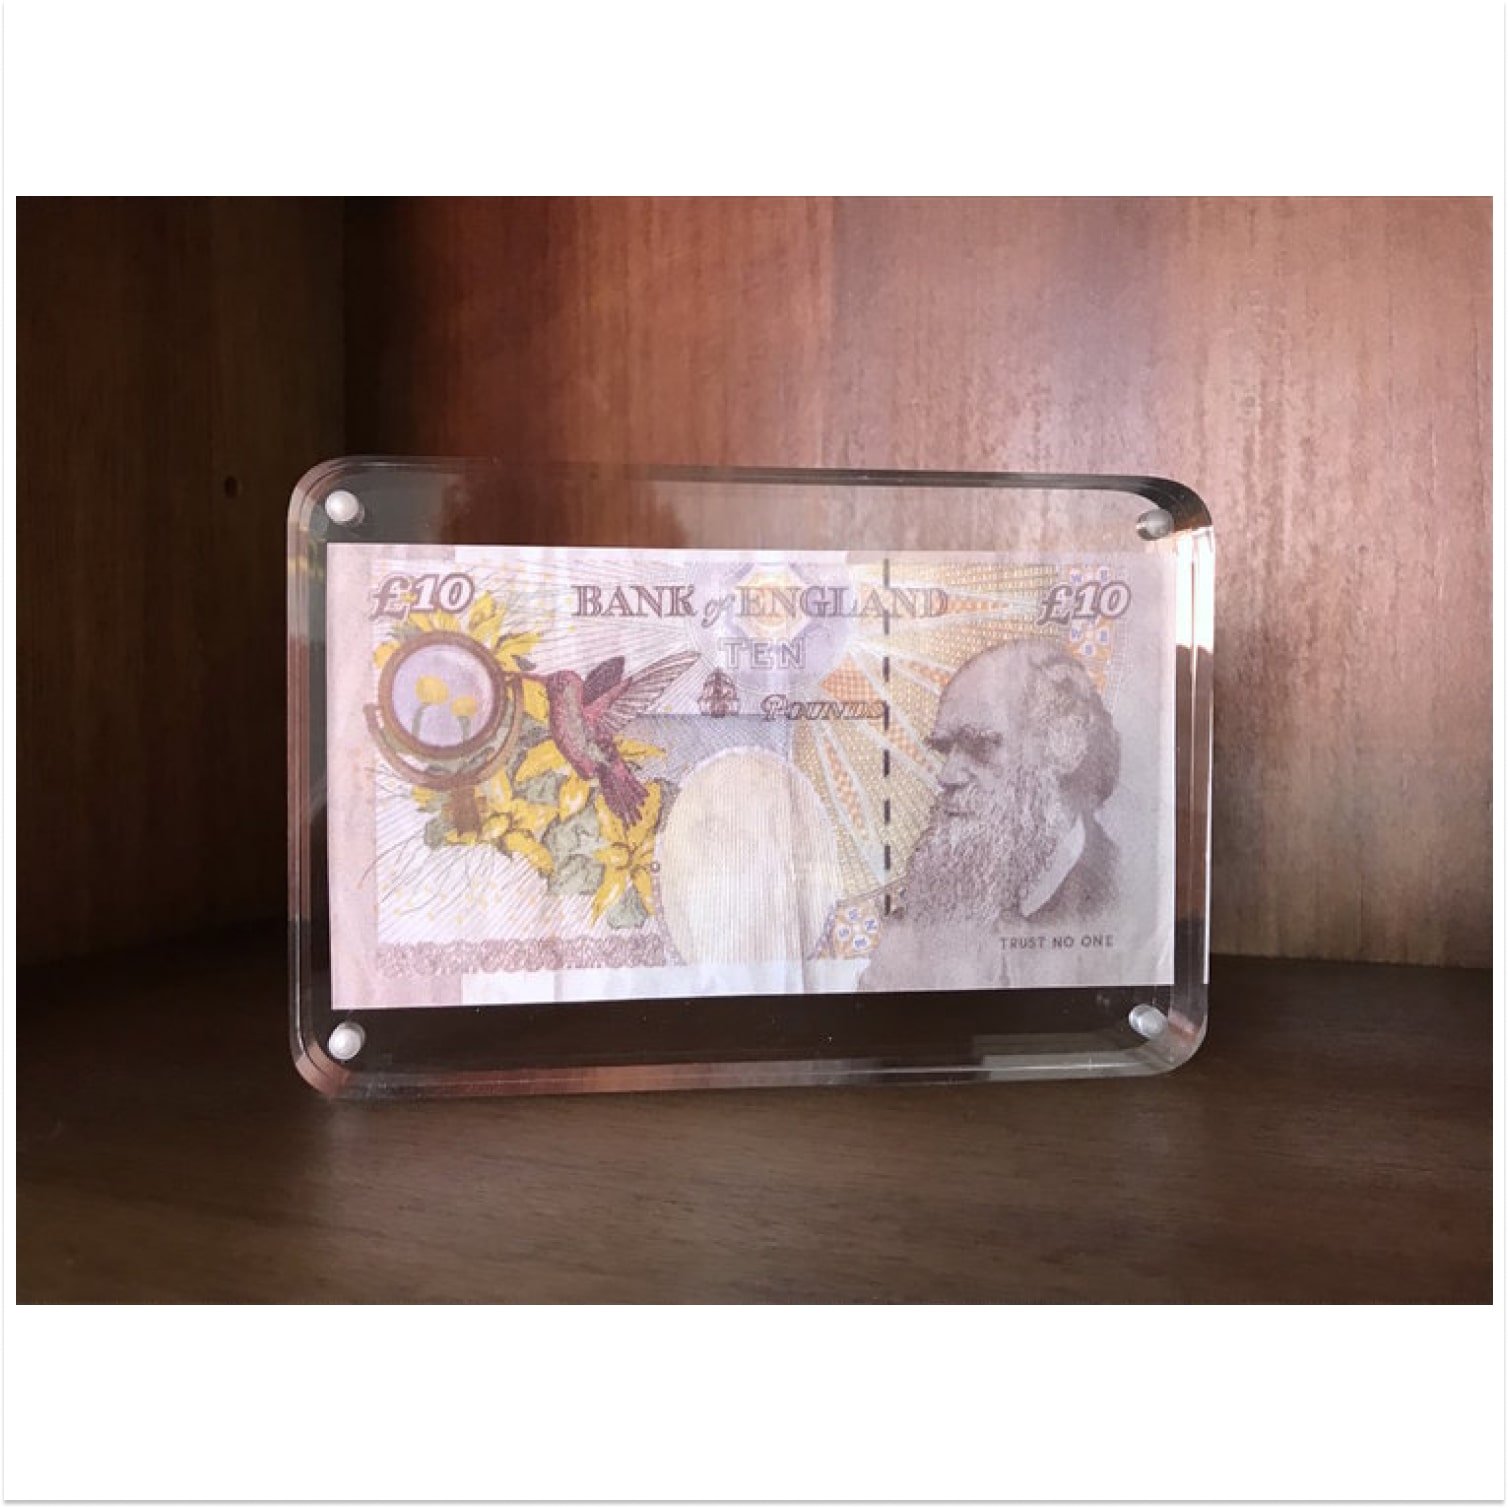 Difaced Tenner: Ten pound note created by Banksy - Dope! Gallery